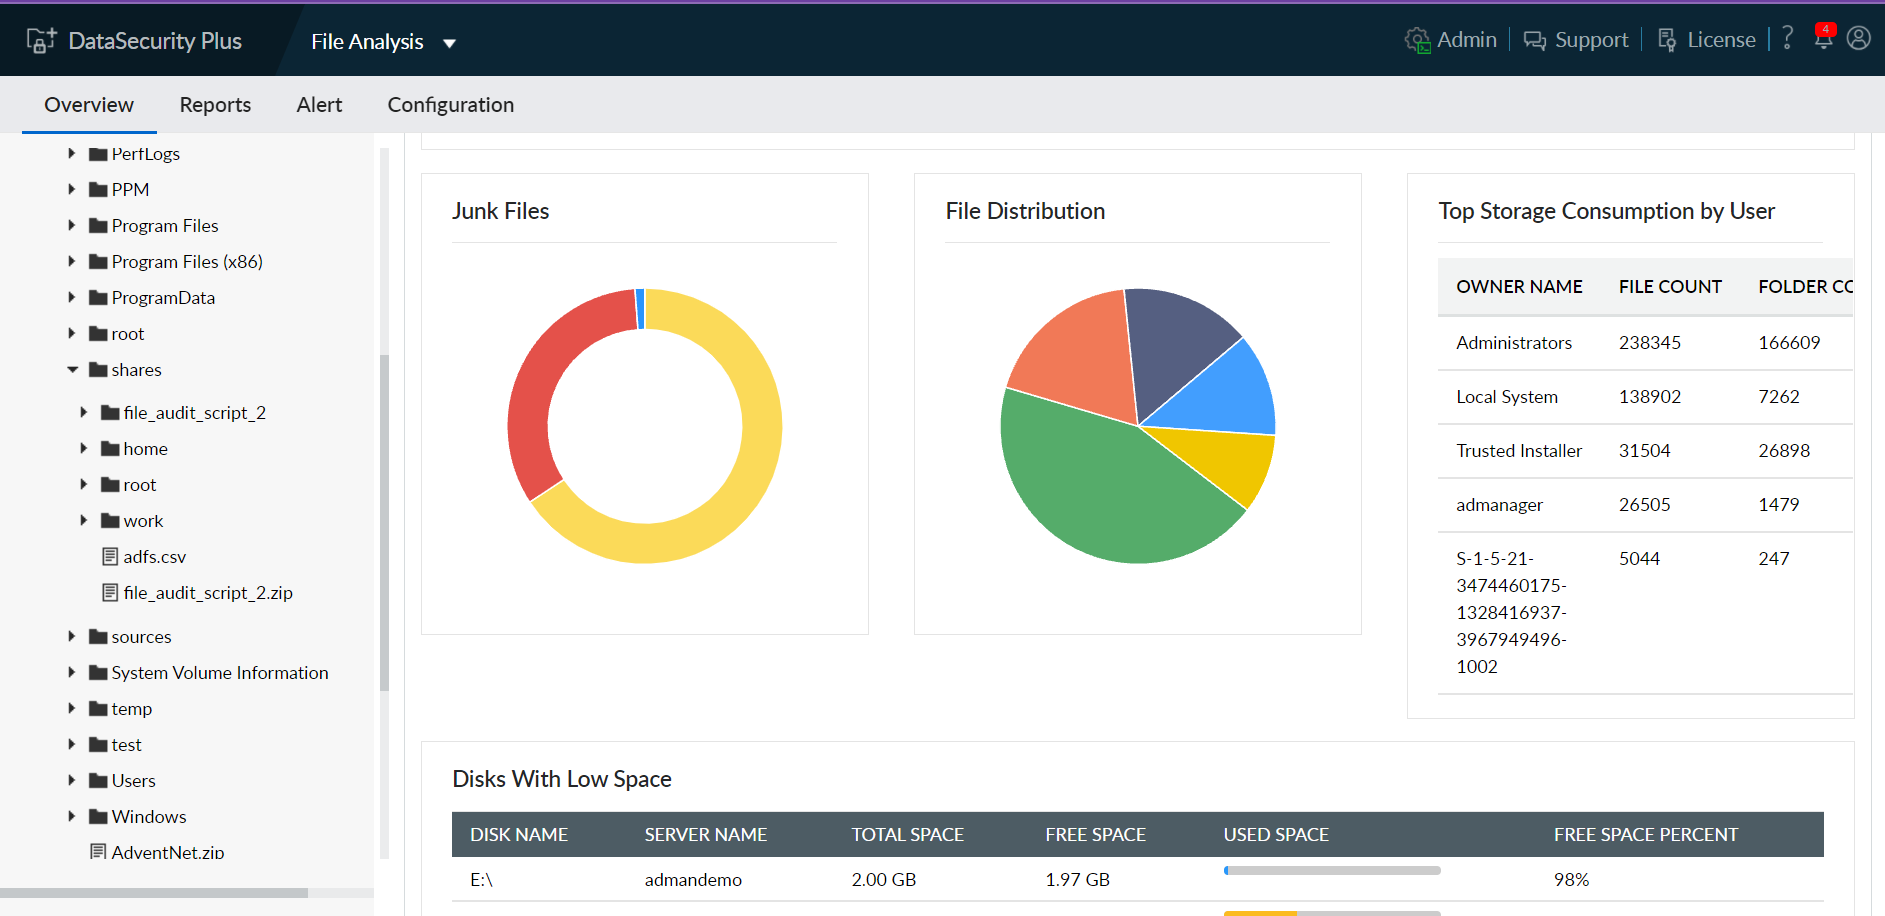 ManageEngine DataSecurity Plus file analysis dashboard